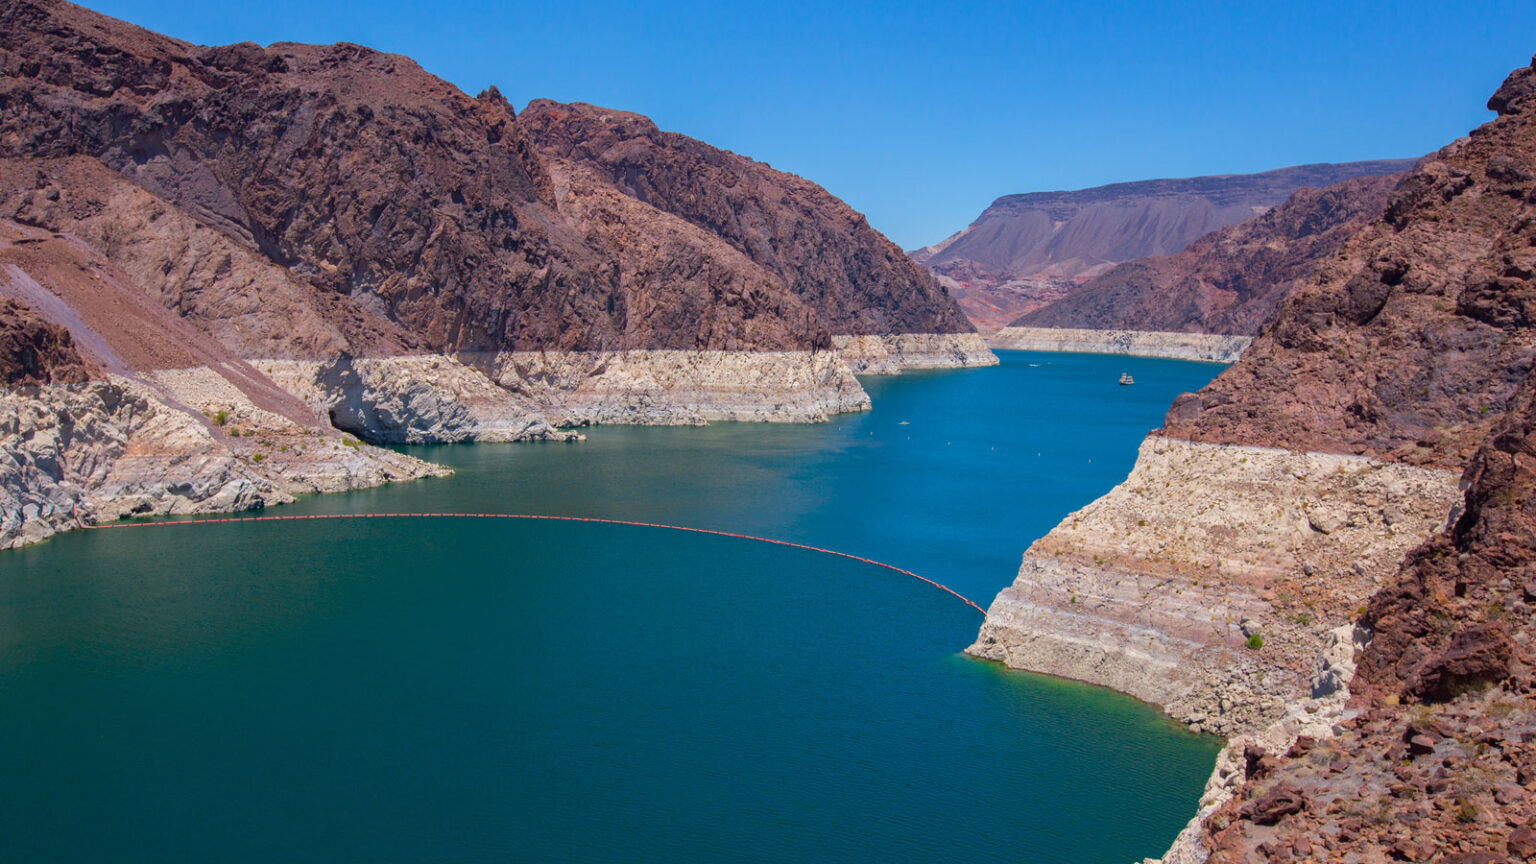 Drought-stricken Colorado River Basin could see additional 20% drop in water flow by 2050